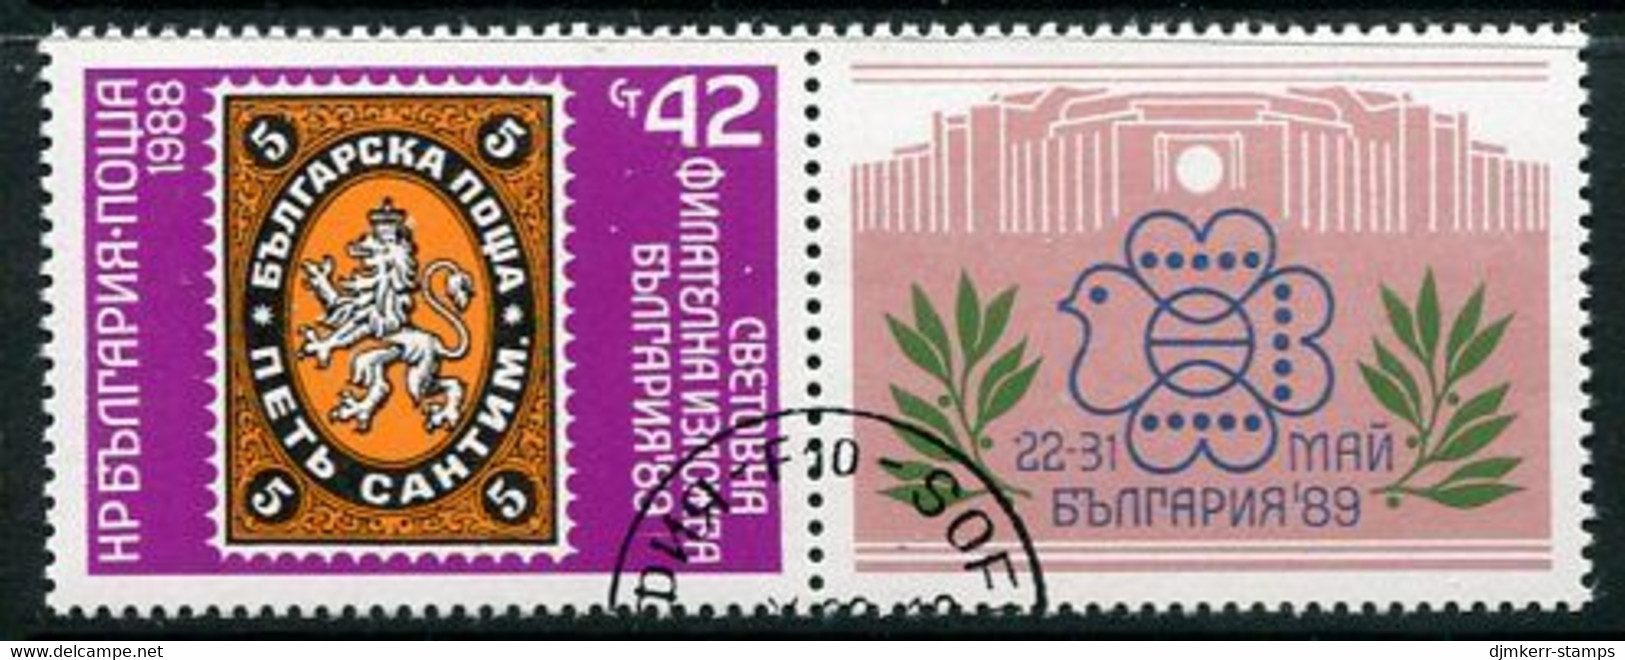 BULGARIA 1988 BULGARIA '89 Exhibition Used.  Michel 3713 Zf - Used Stamps